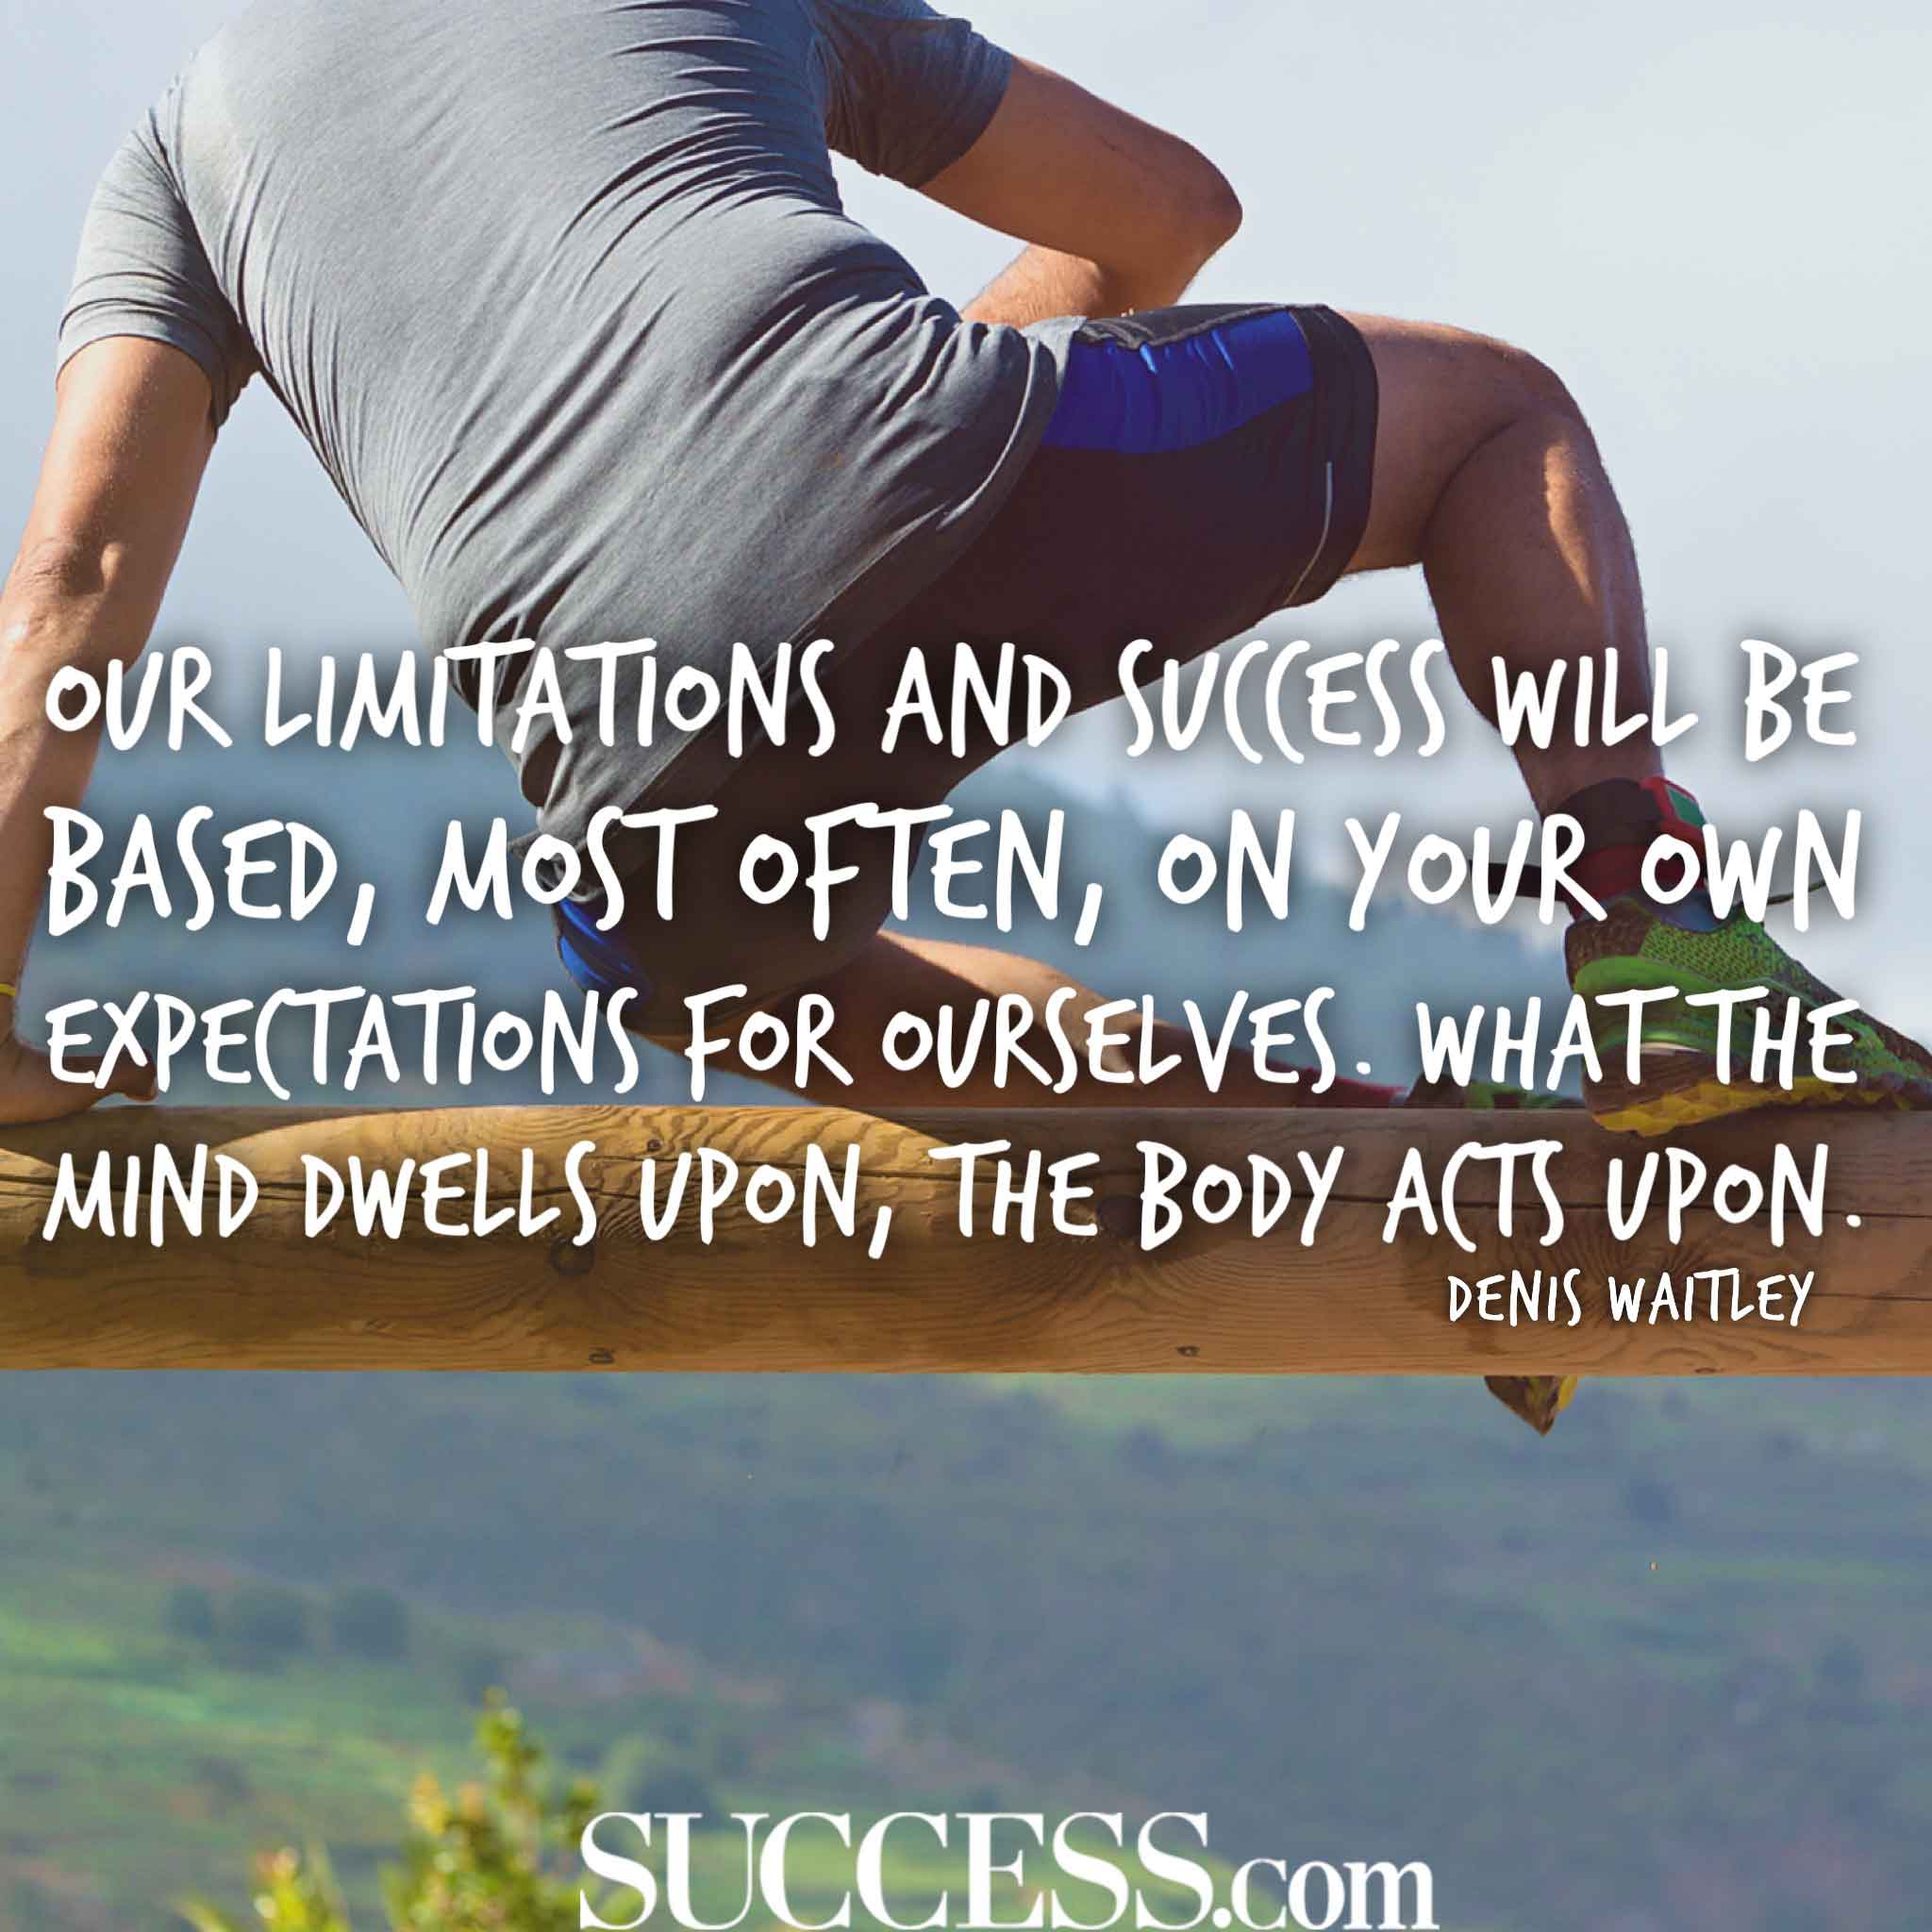 15 Quotes to Overcome Your Self-Limiting Beliefs